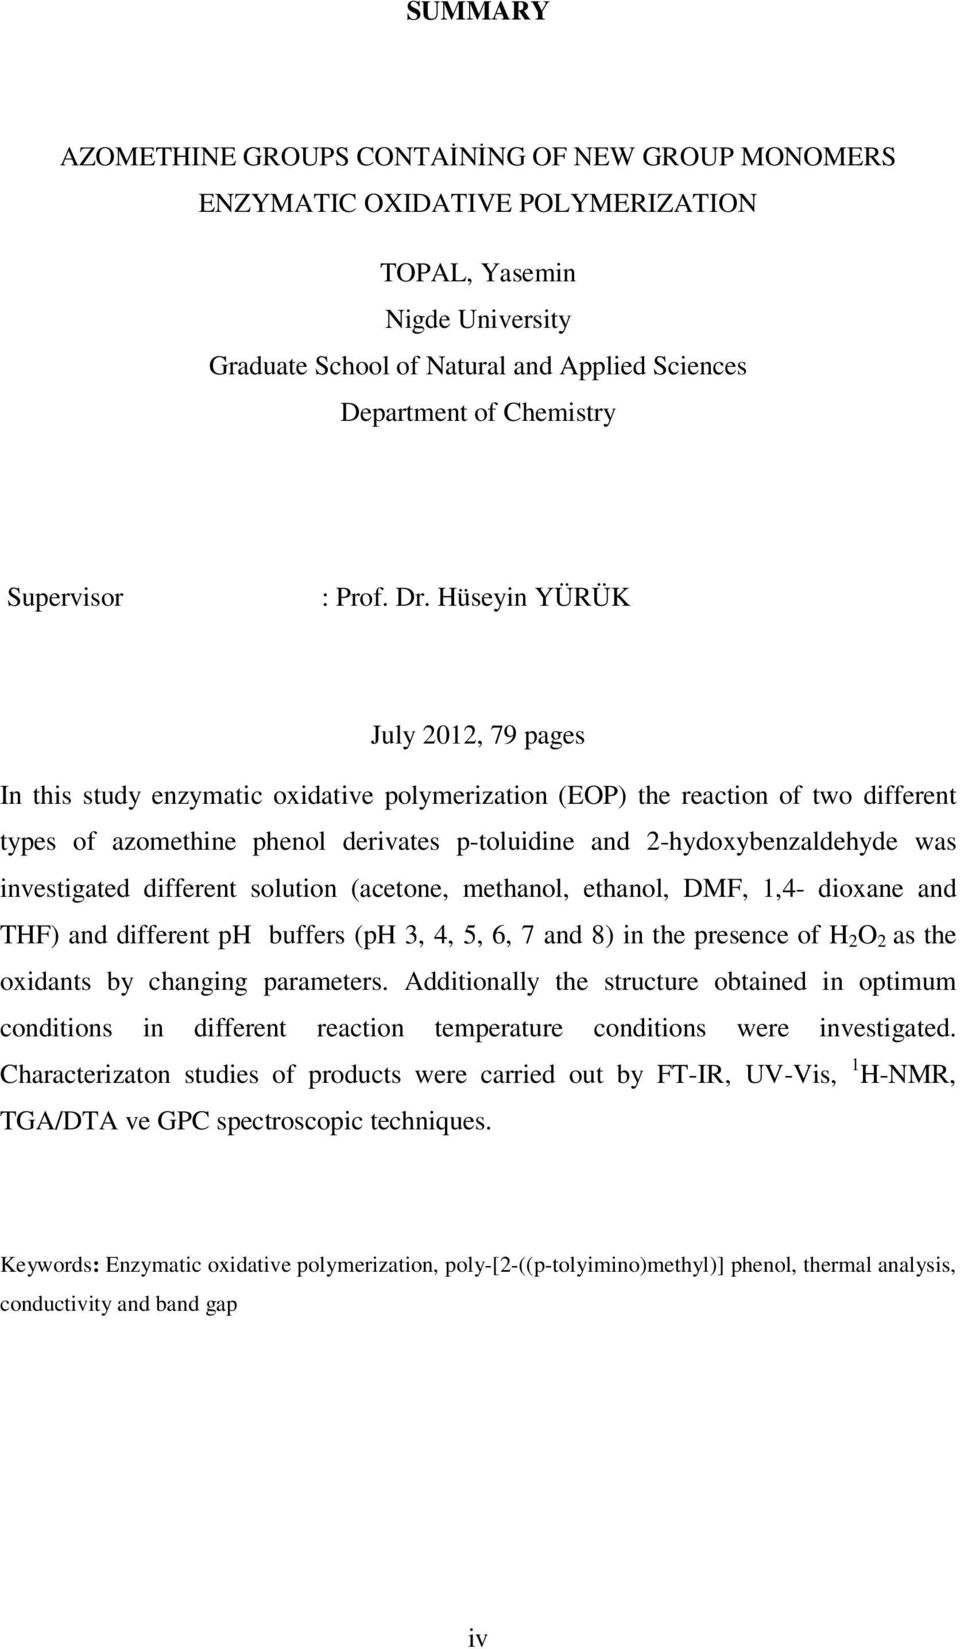 Hüseyin YÜRÜK July 2012, 79 pages In this study enzymatic oxidative polymerization (EP) the reaction of two different types of azomethine phenol derivates p-toluidine and 2-hydoxybenzaldehyde was